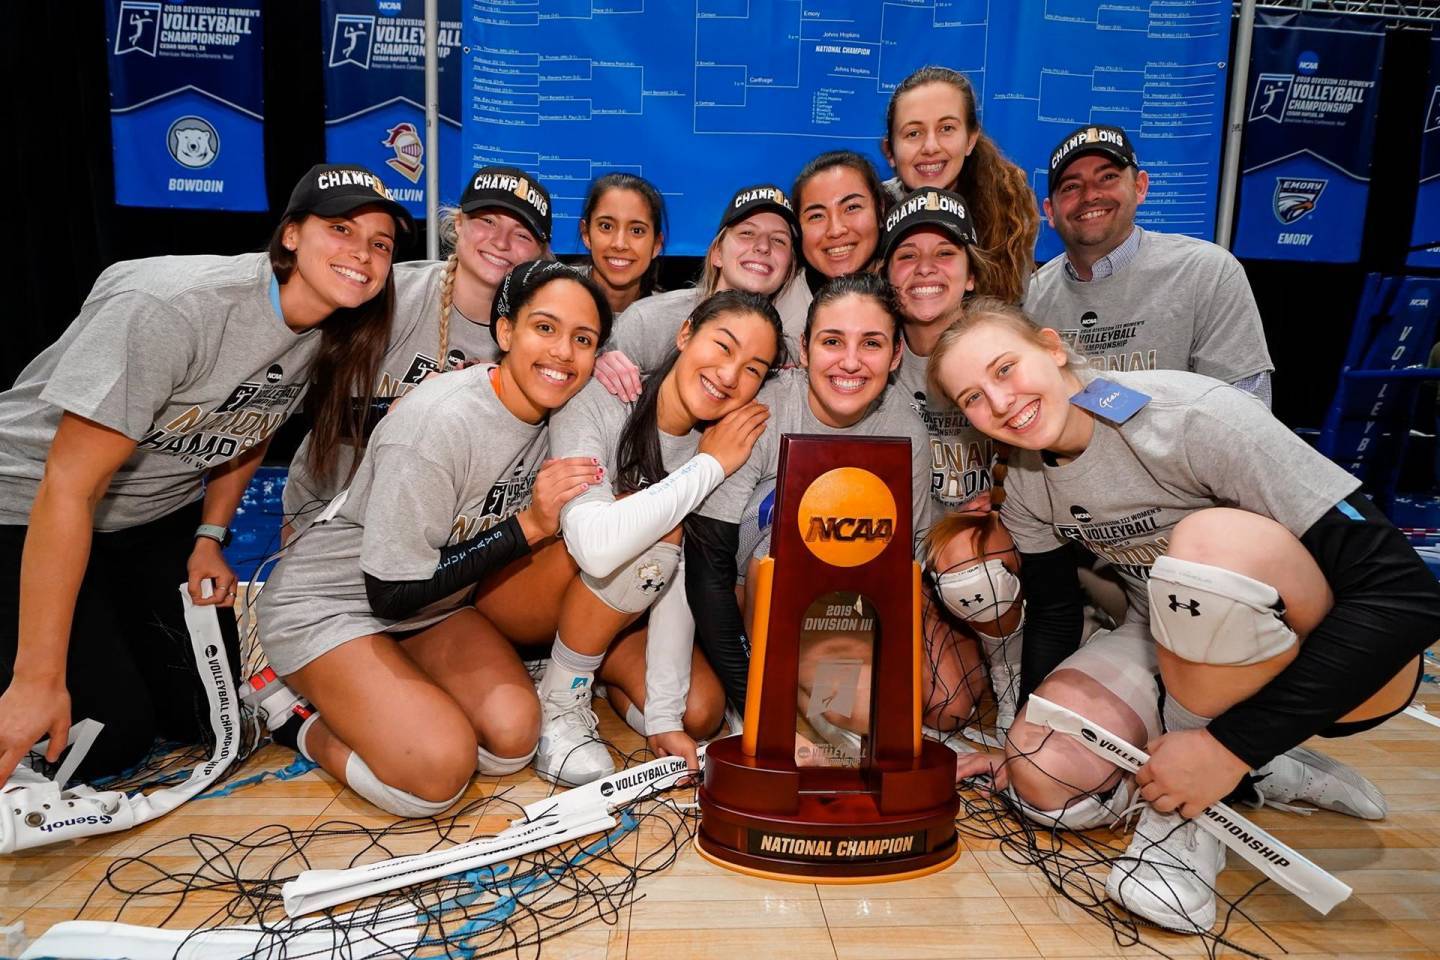 Volleyball team poses with the NCAA championship trophy